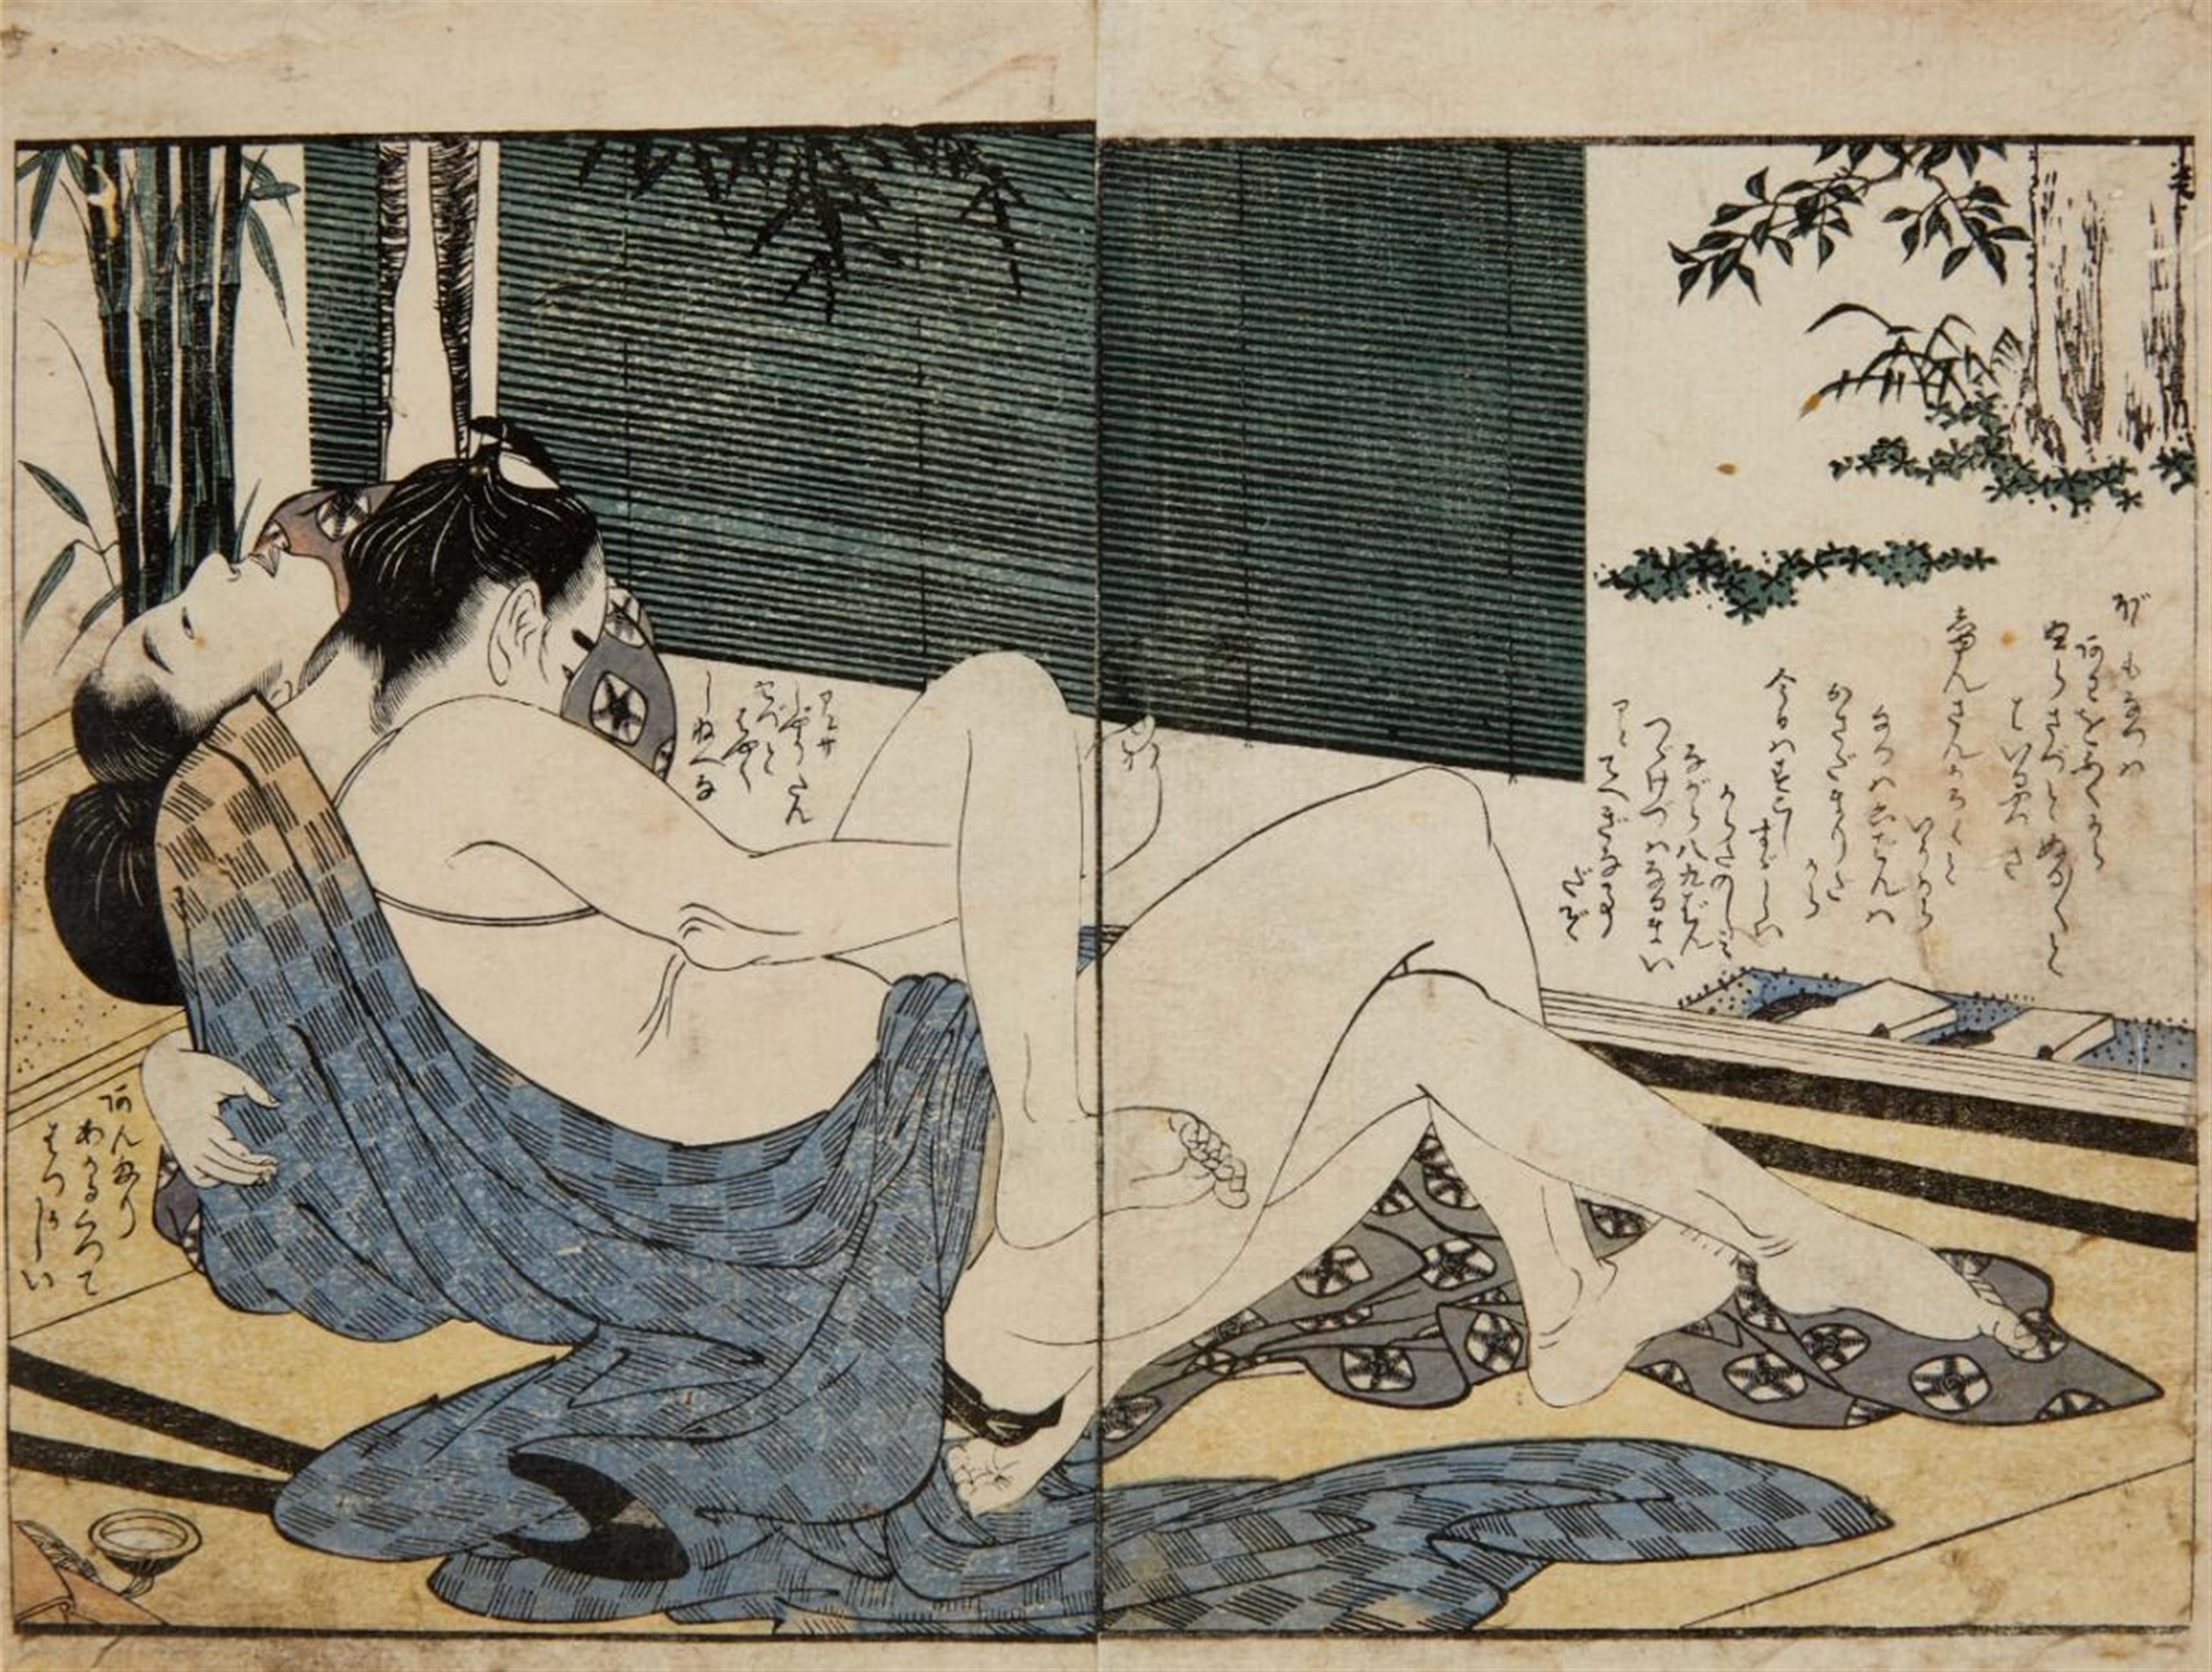 Kitagawa Utamaro
Various Artists of the 18th and 19th centuries - a) Oban, yoko-e. Shunga. Man with a very young woman. Comments. Unsigned. b) Four double page illustrations from various erotic albums. Unsigned. (5) - image-3